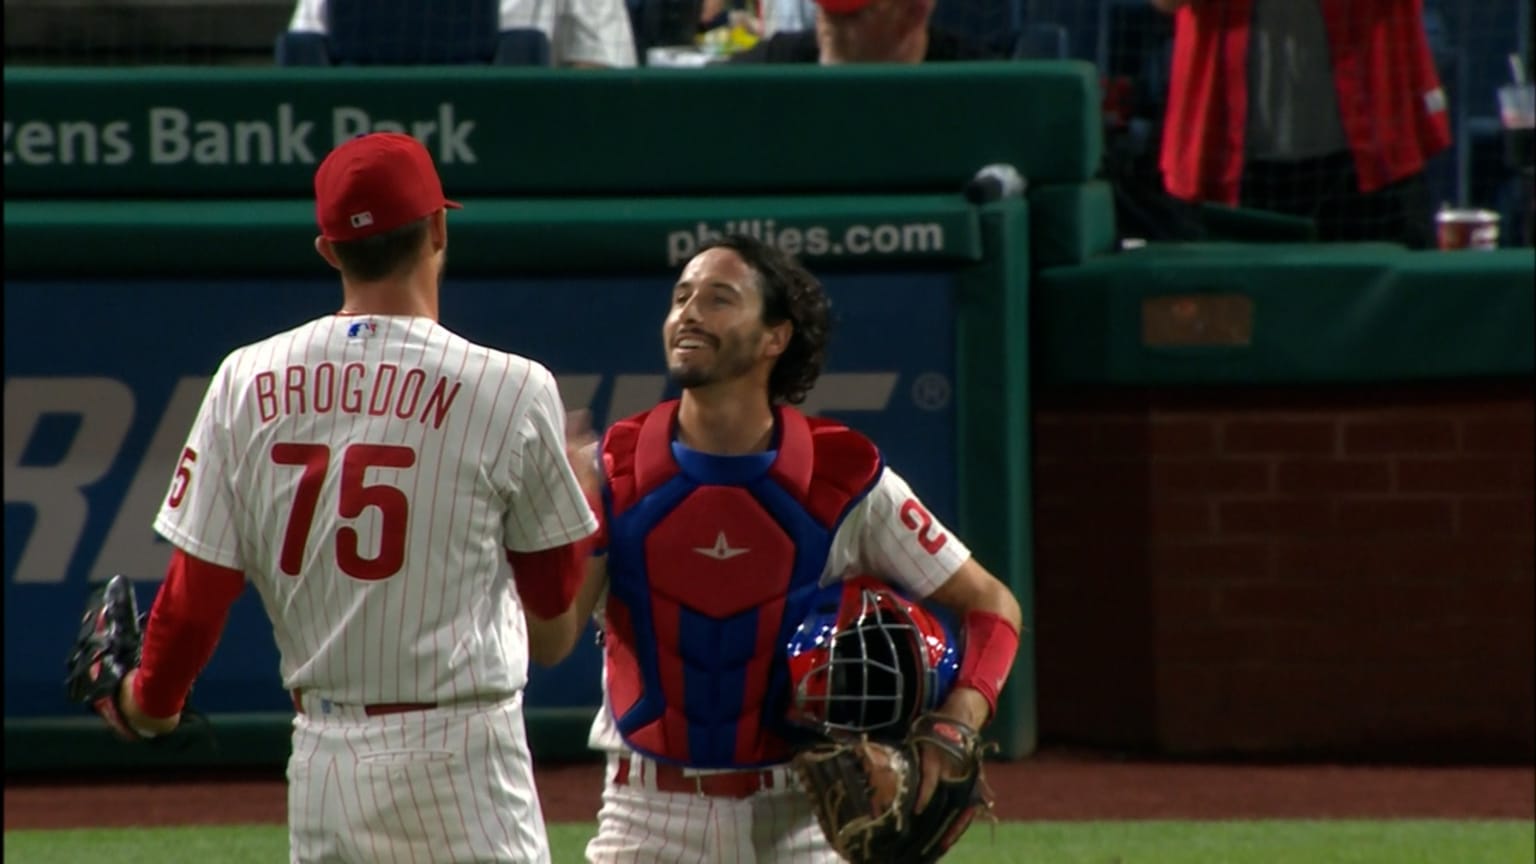 Connor Brogdon making himself more valuable for Phillies – NBC